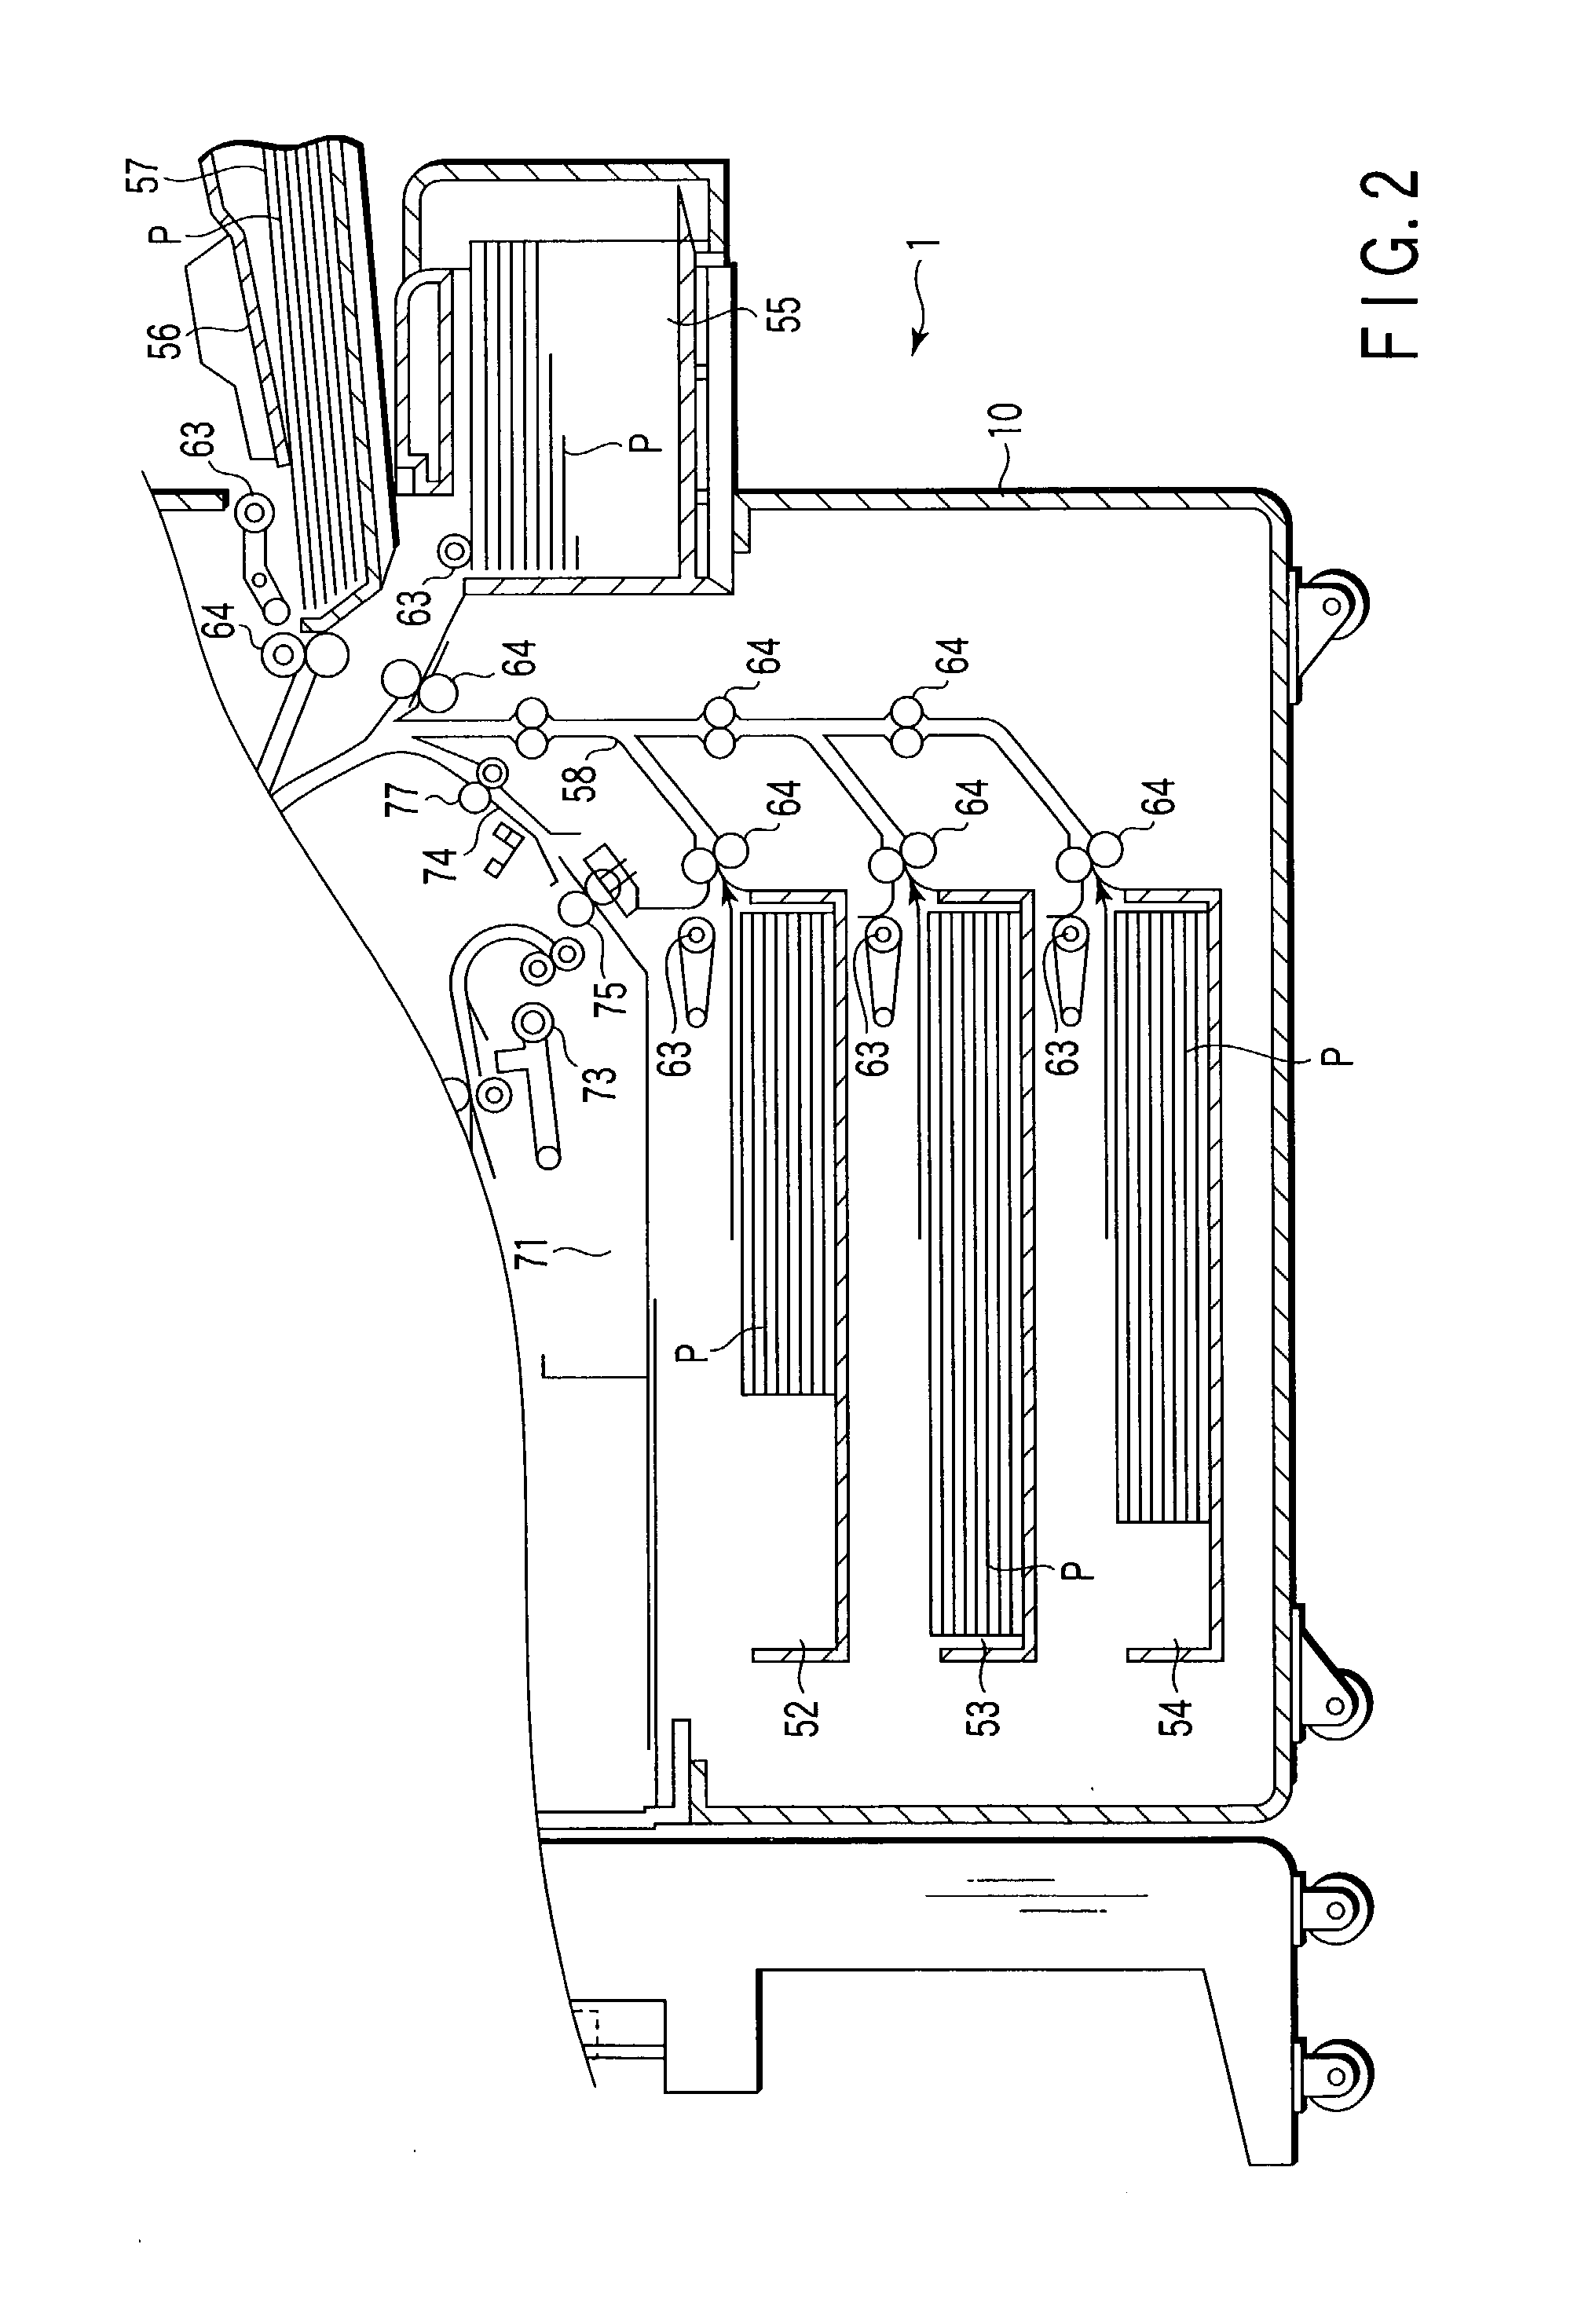 Image forming apparatus with predetermined copy quality set by user or operator